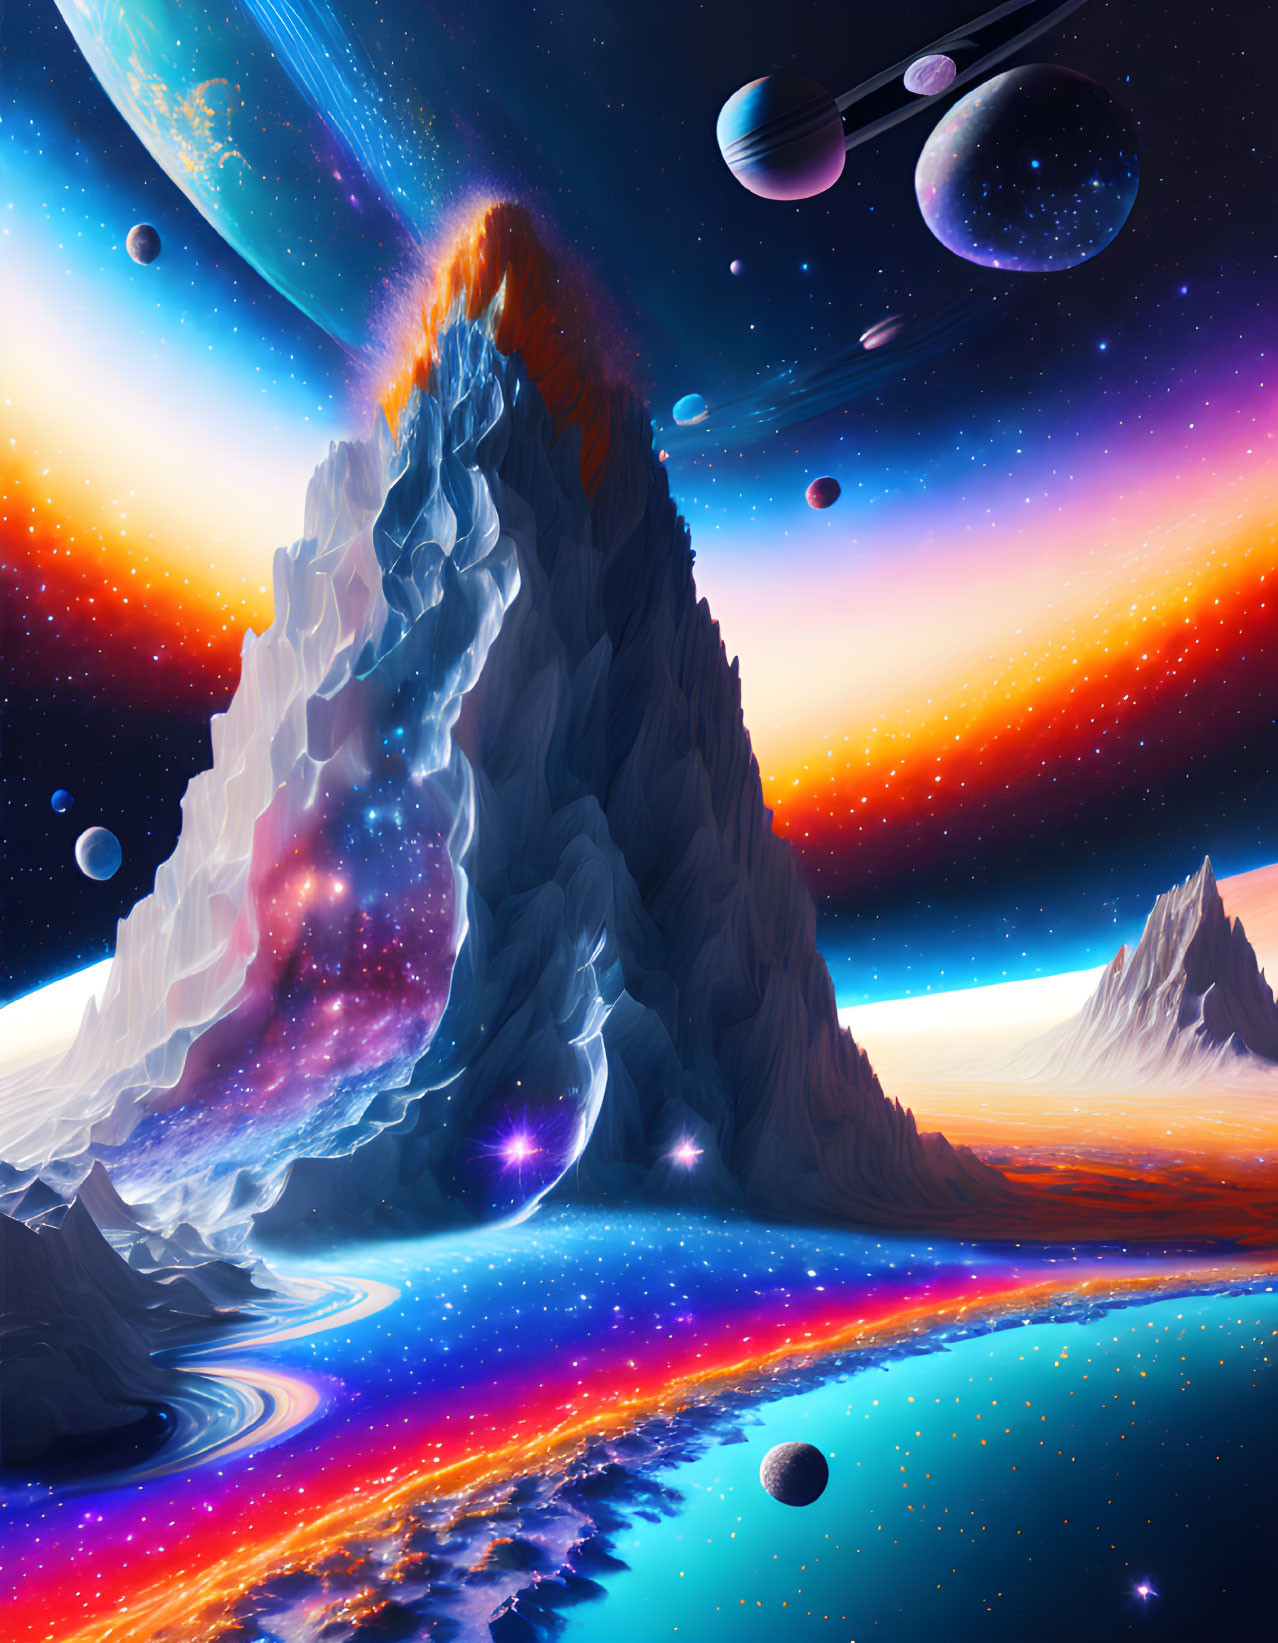 Colorful Sci-Fi Landscape with Mountain, River, Planets, and Nebula